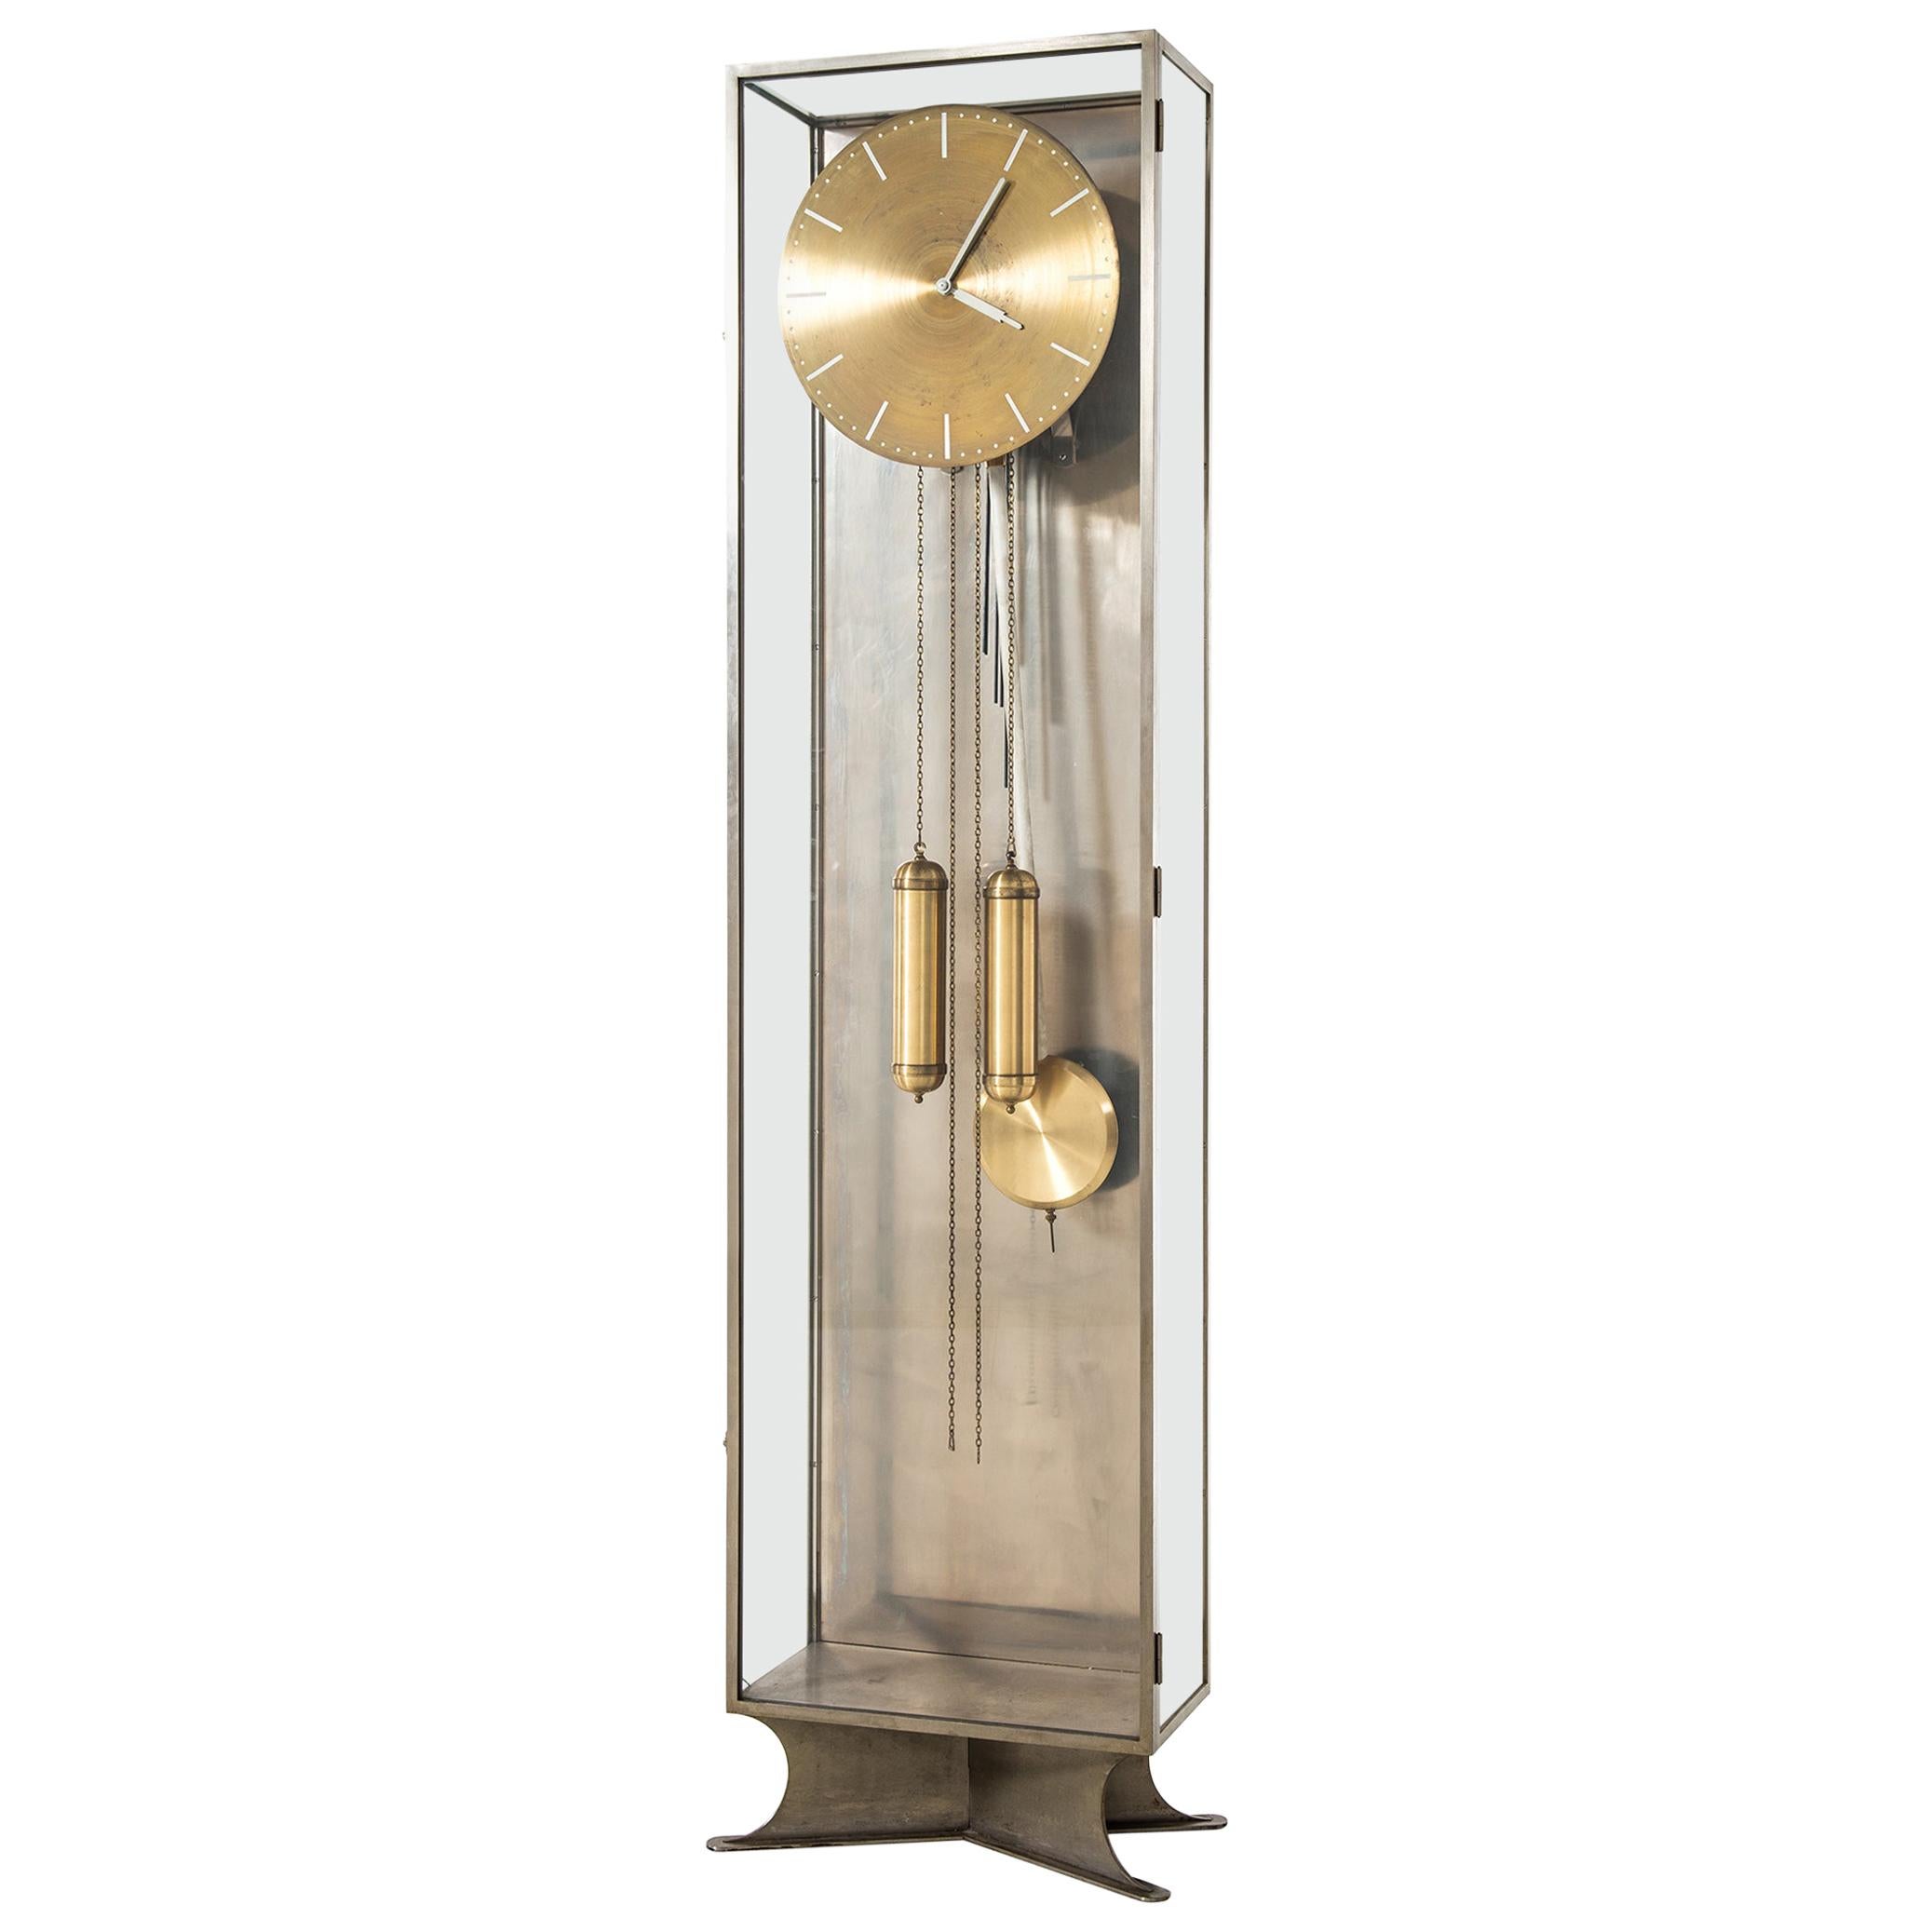 Modernist Grandfather Clock in Steel and Glass